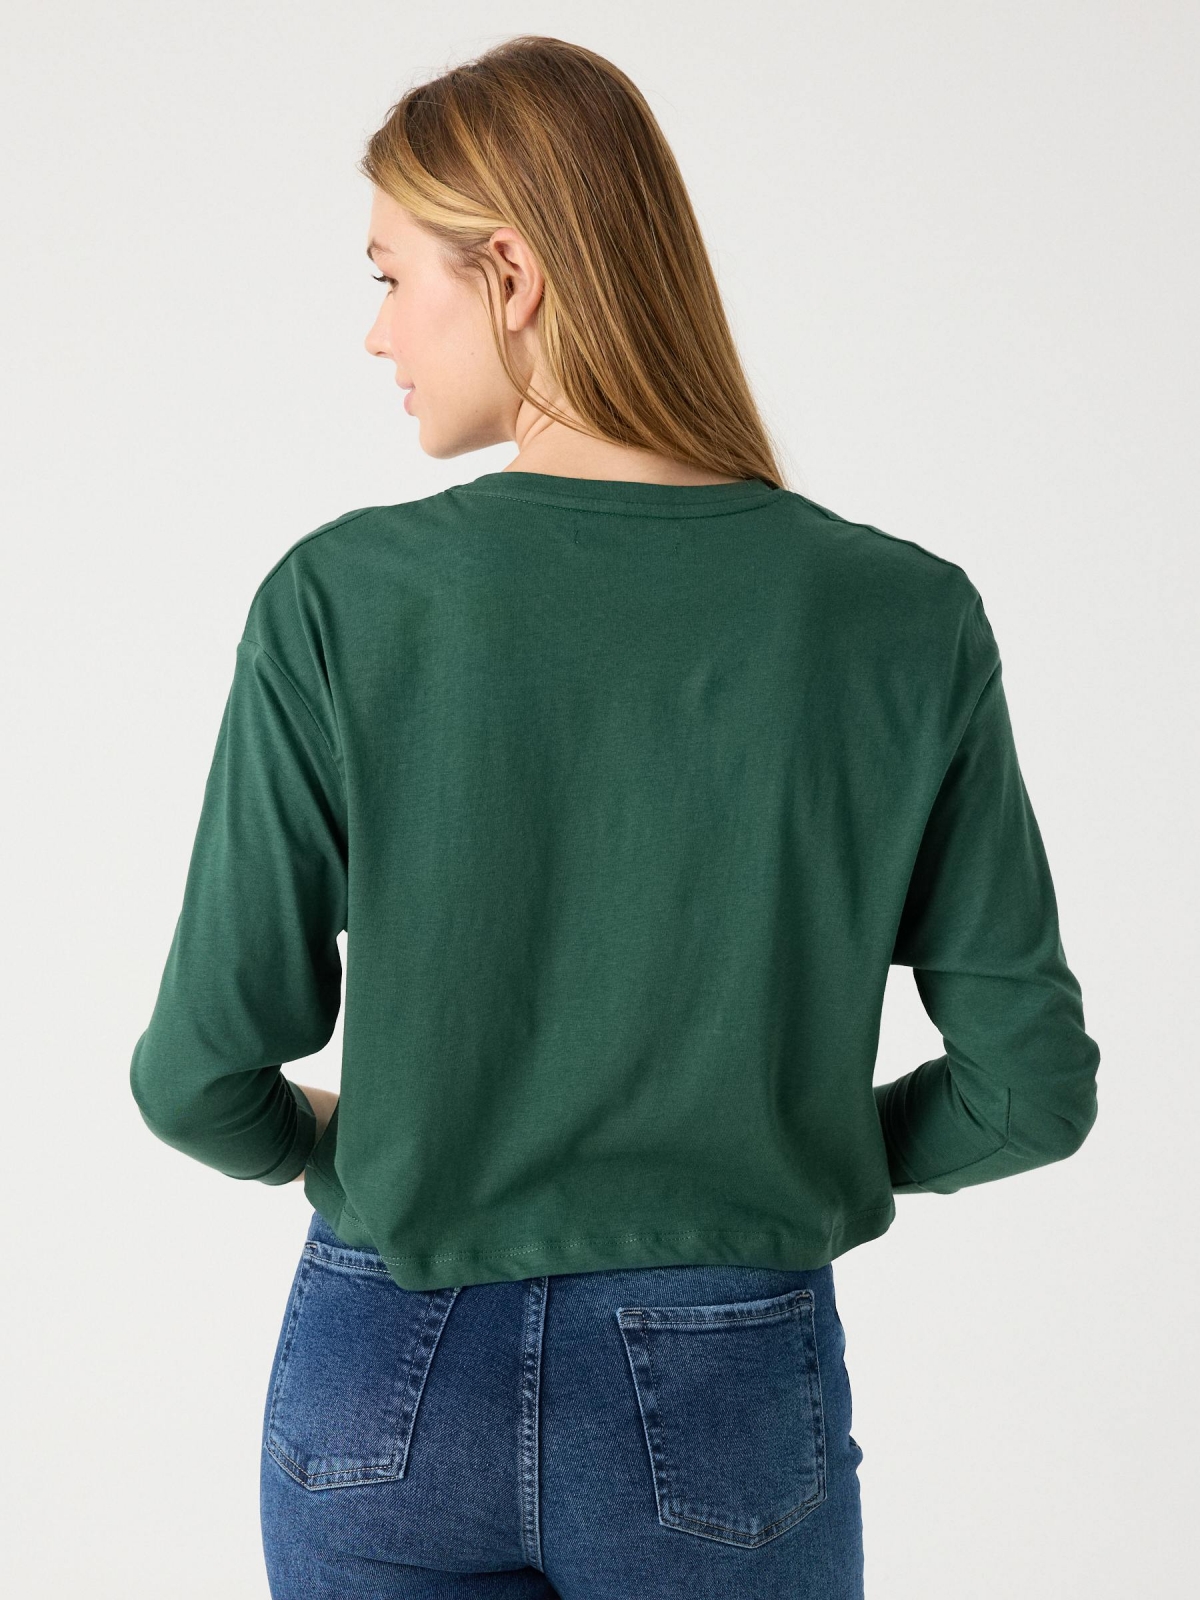 T-shirt with print green middle back view